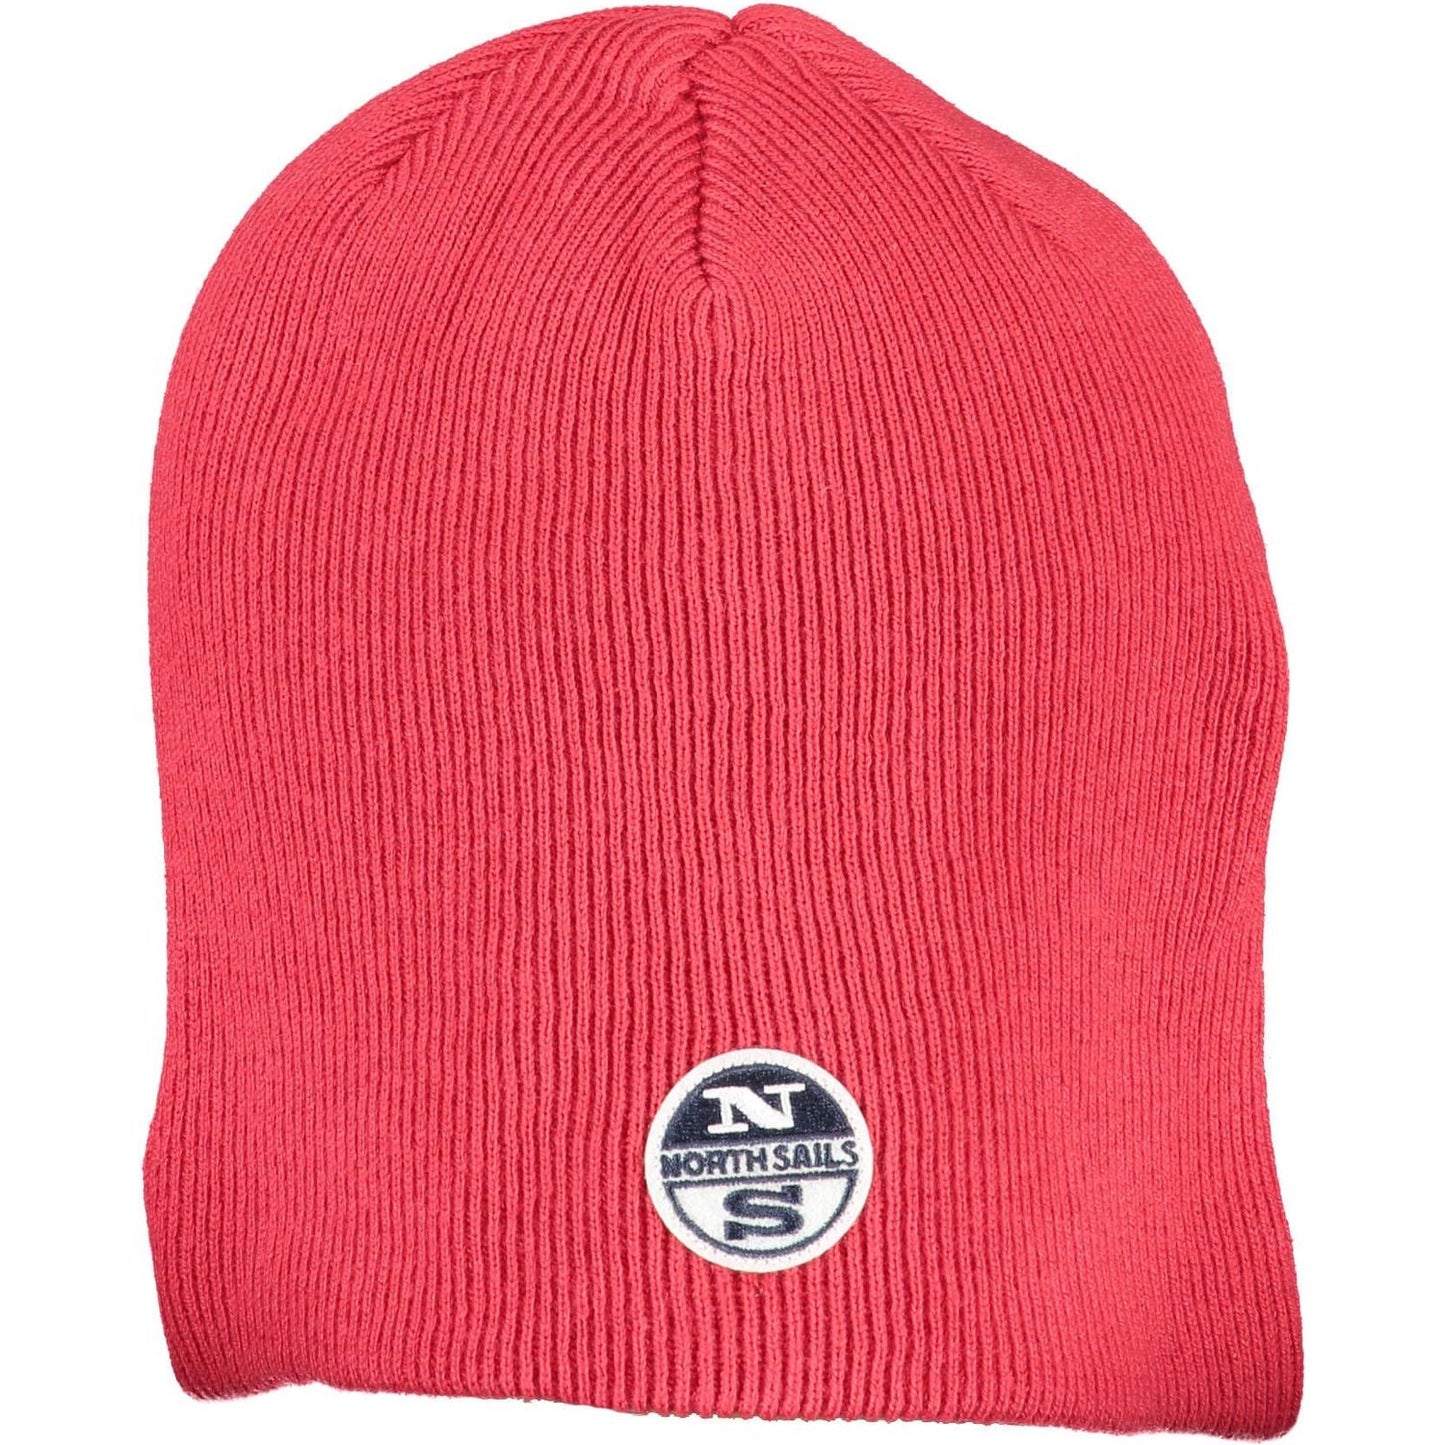 Chic Red Cotton Cap with Iconic Logo North Sails